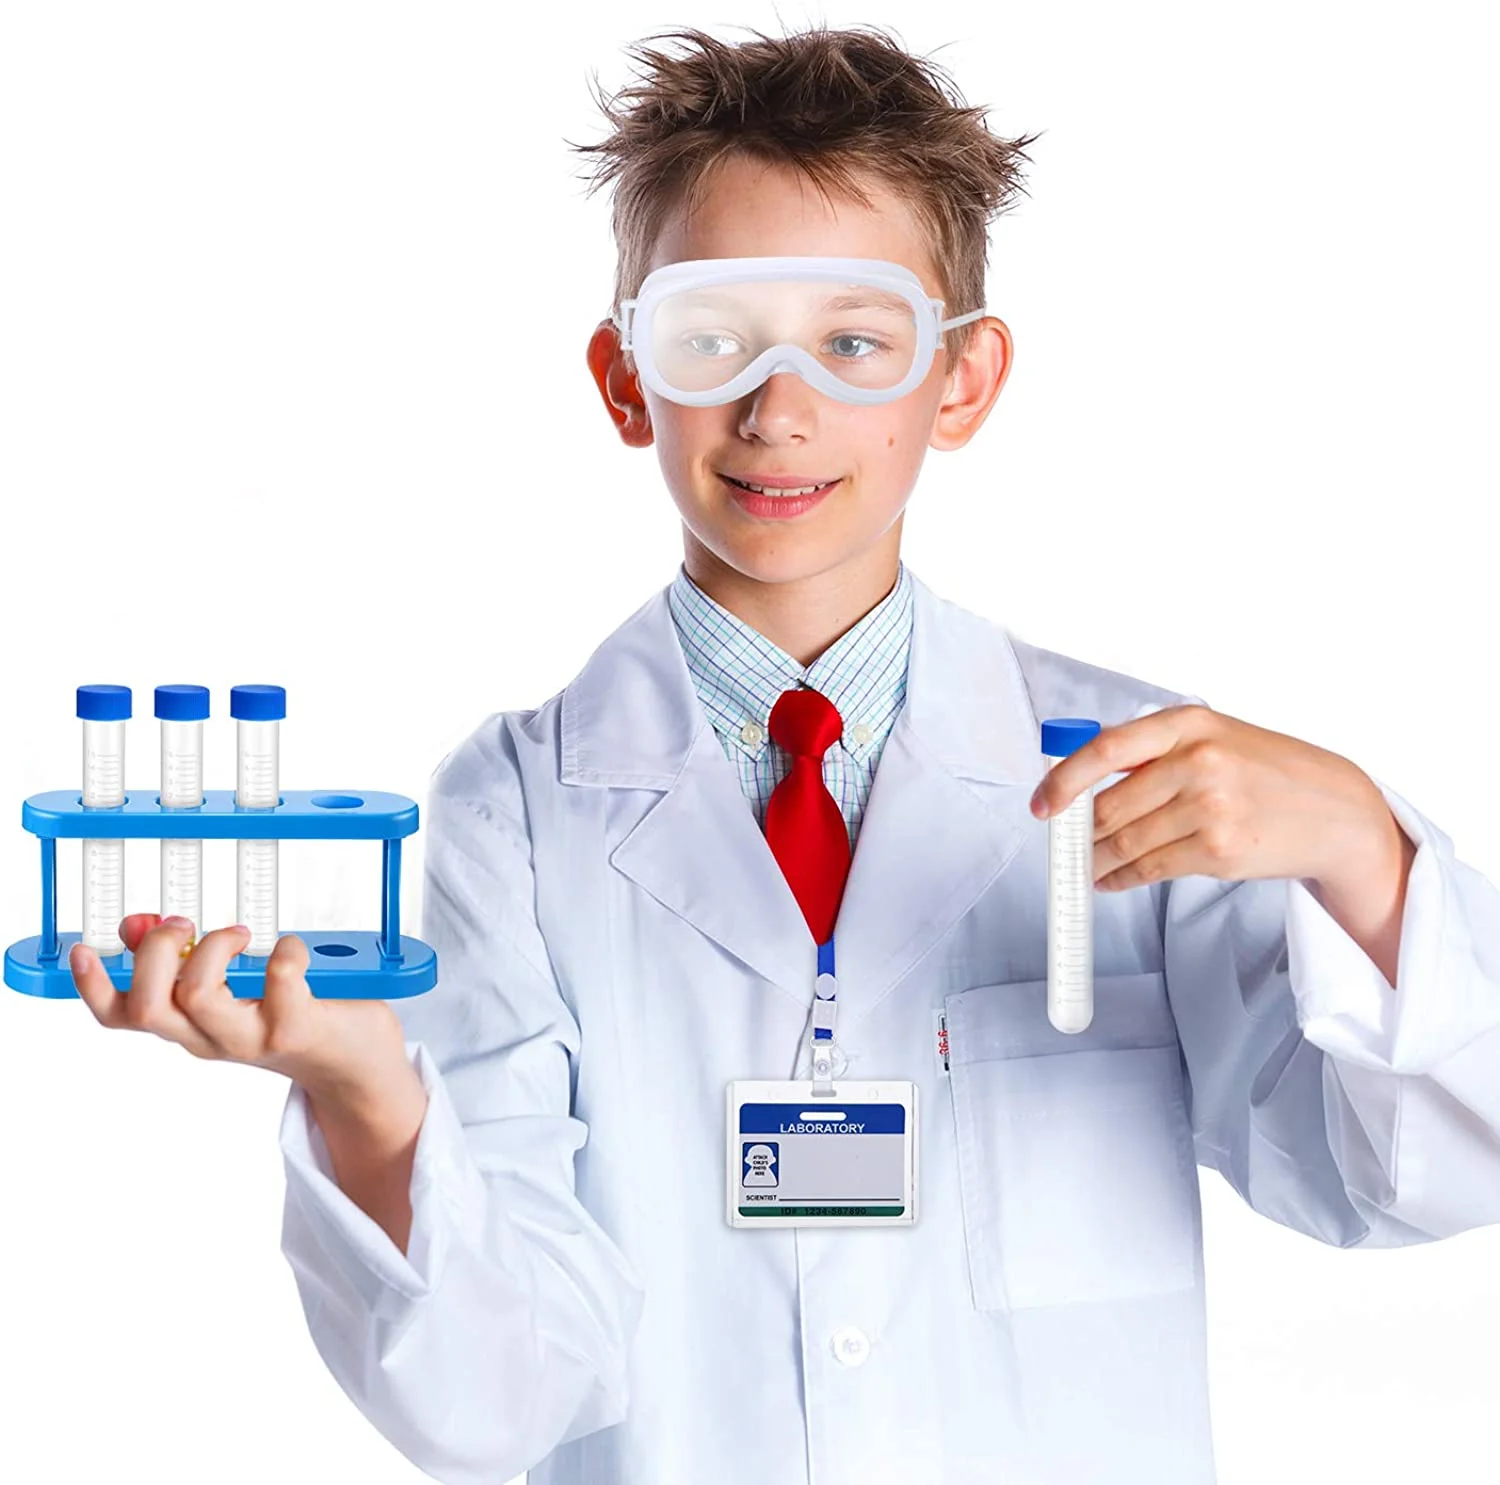 
Wholesale 11 Pieces Kids Dress Up Lab Costume Scientist Costume Accessory For Boys Girls Science Experiment Role Play 